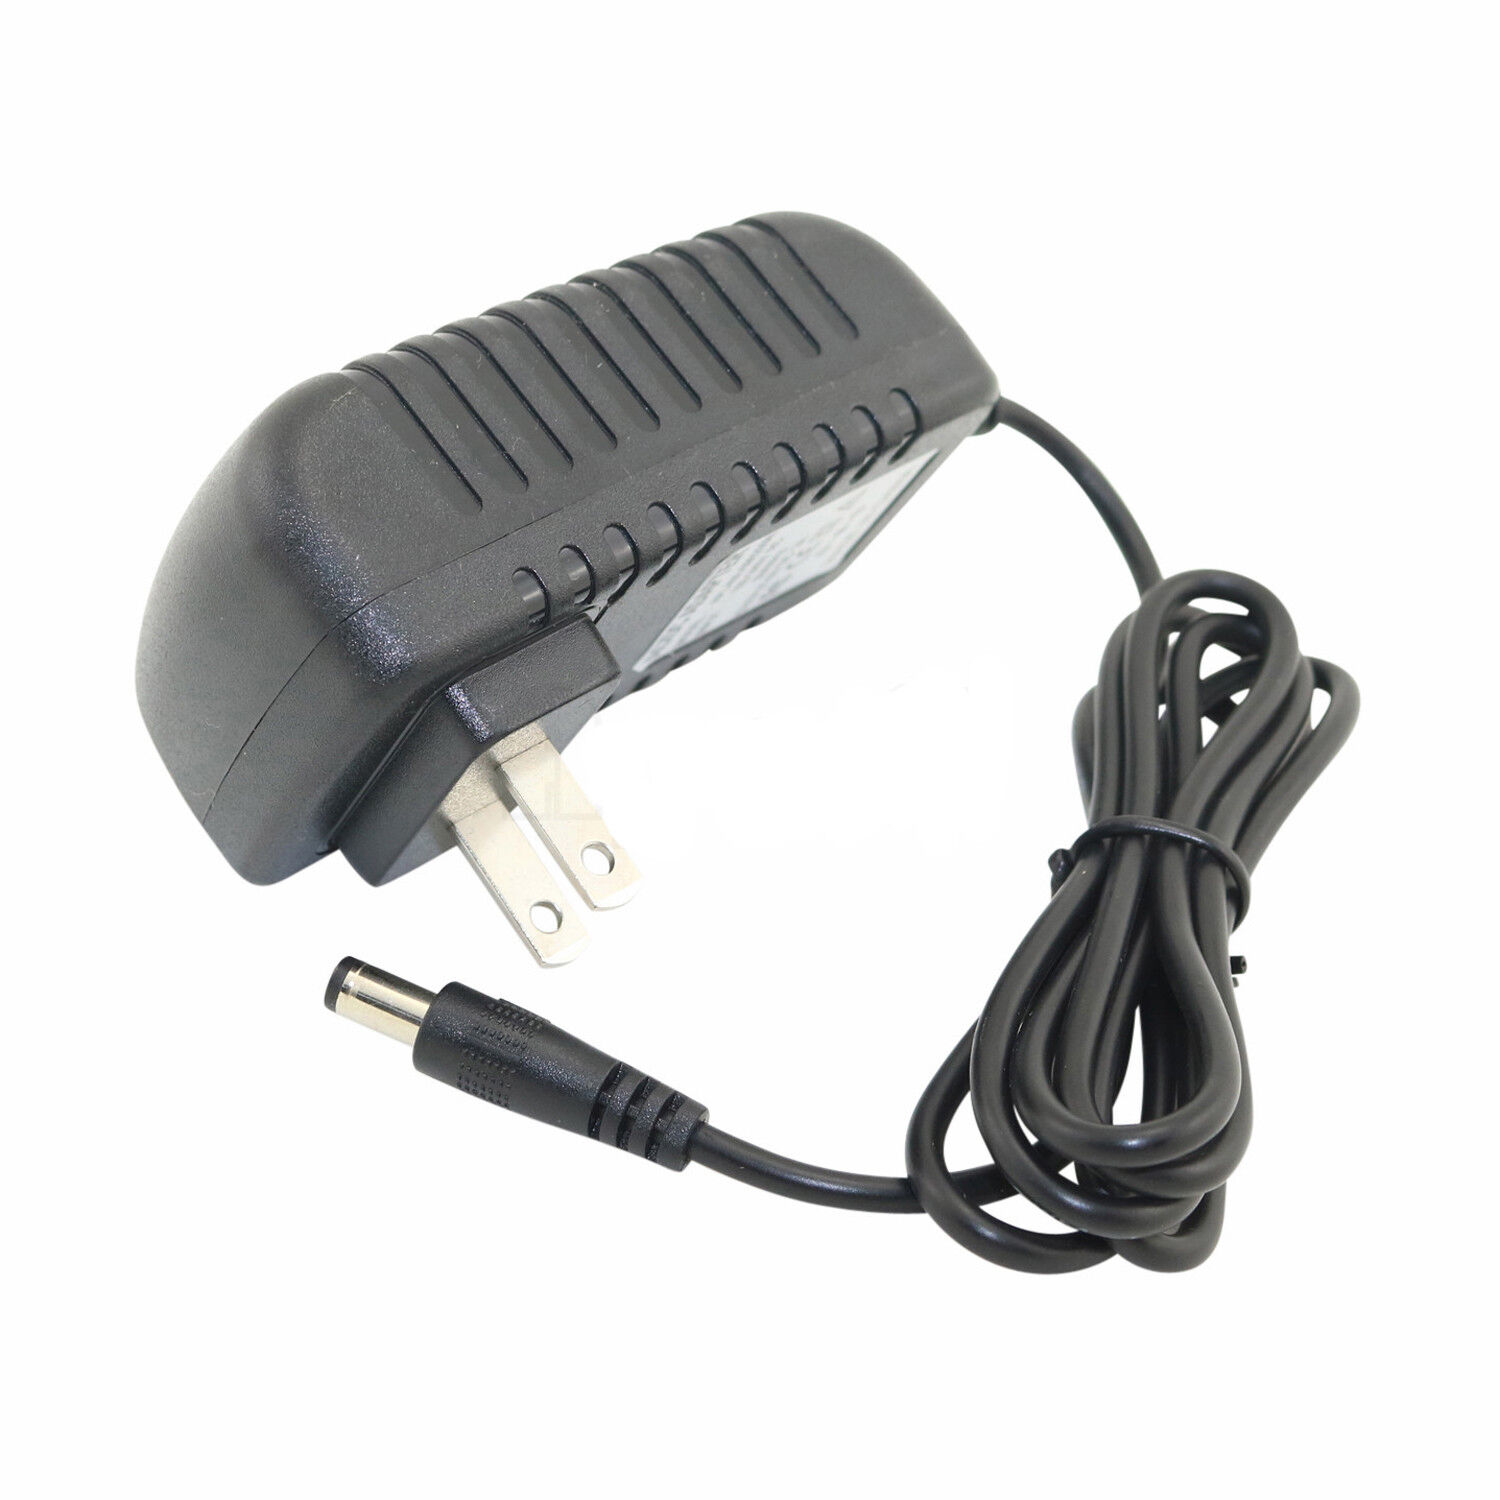 Brother P-Touch PT-300 PT300 Label Maker NEW AC ADAPTER CHARGER DC SUPPLY CORD Type AC/DC adapter Wall Charger Compatib